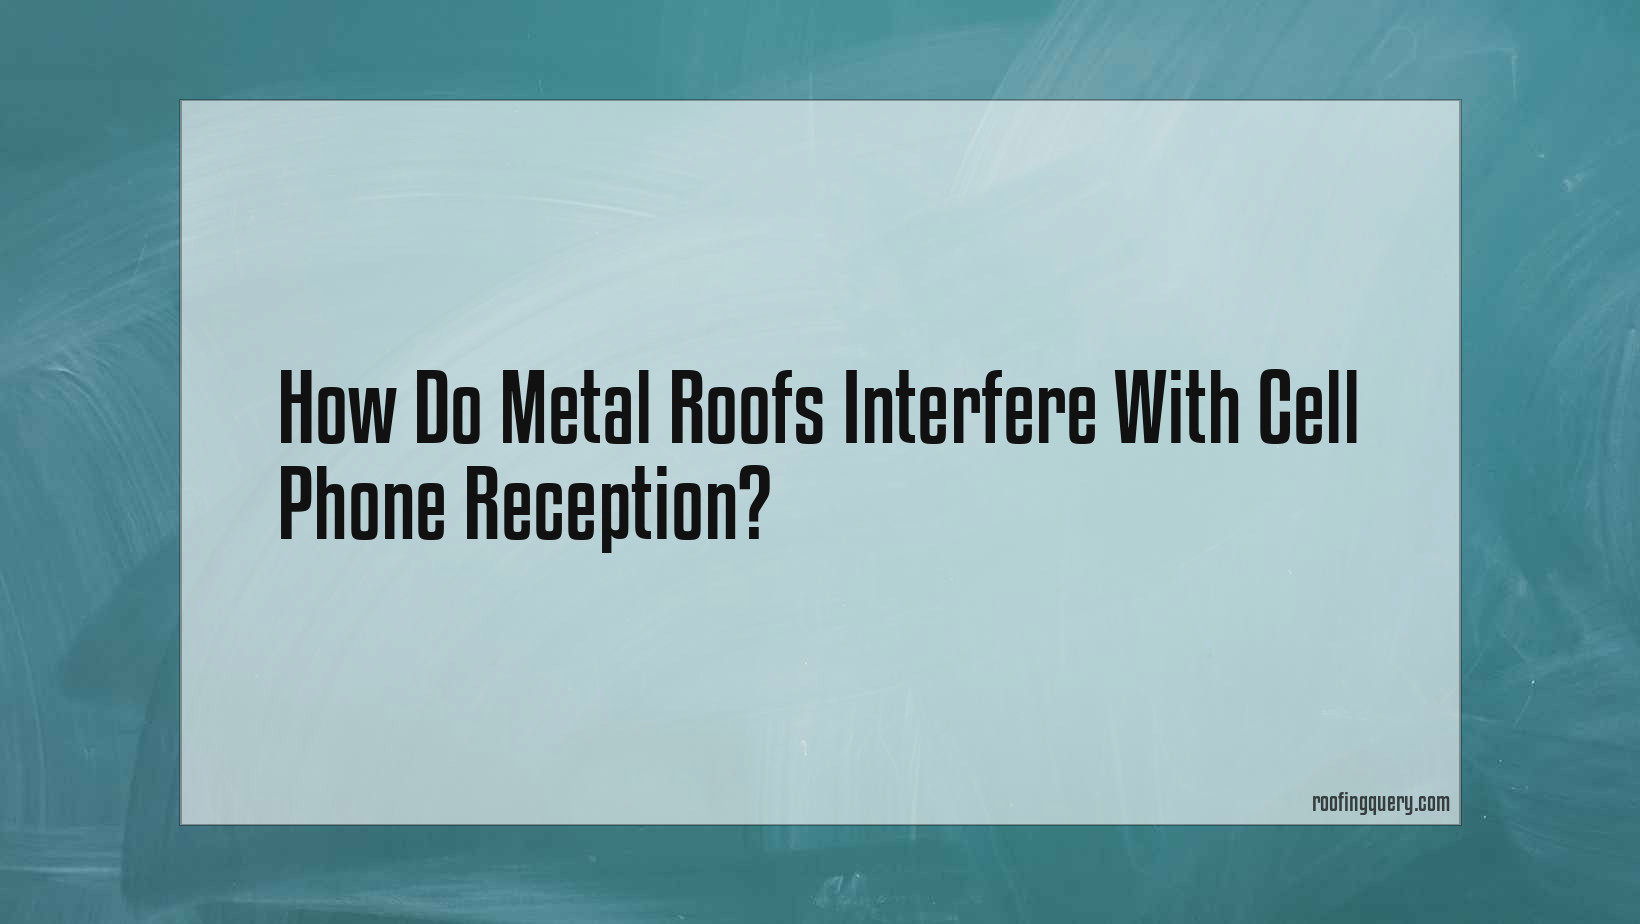 How Do Metal Roofs Interfere With Cell Phone Reception?